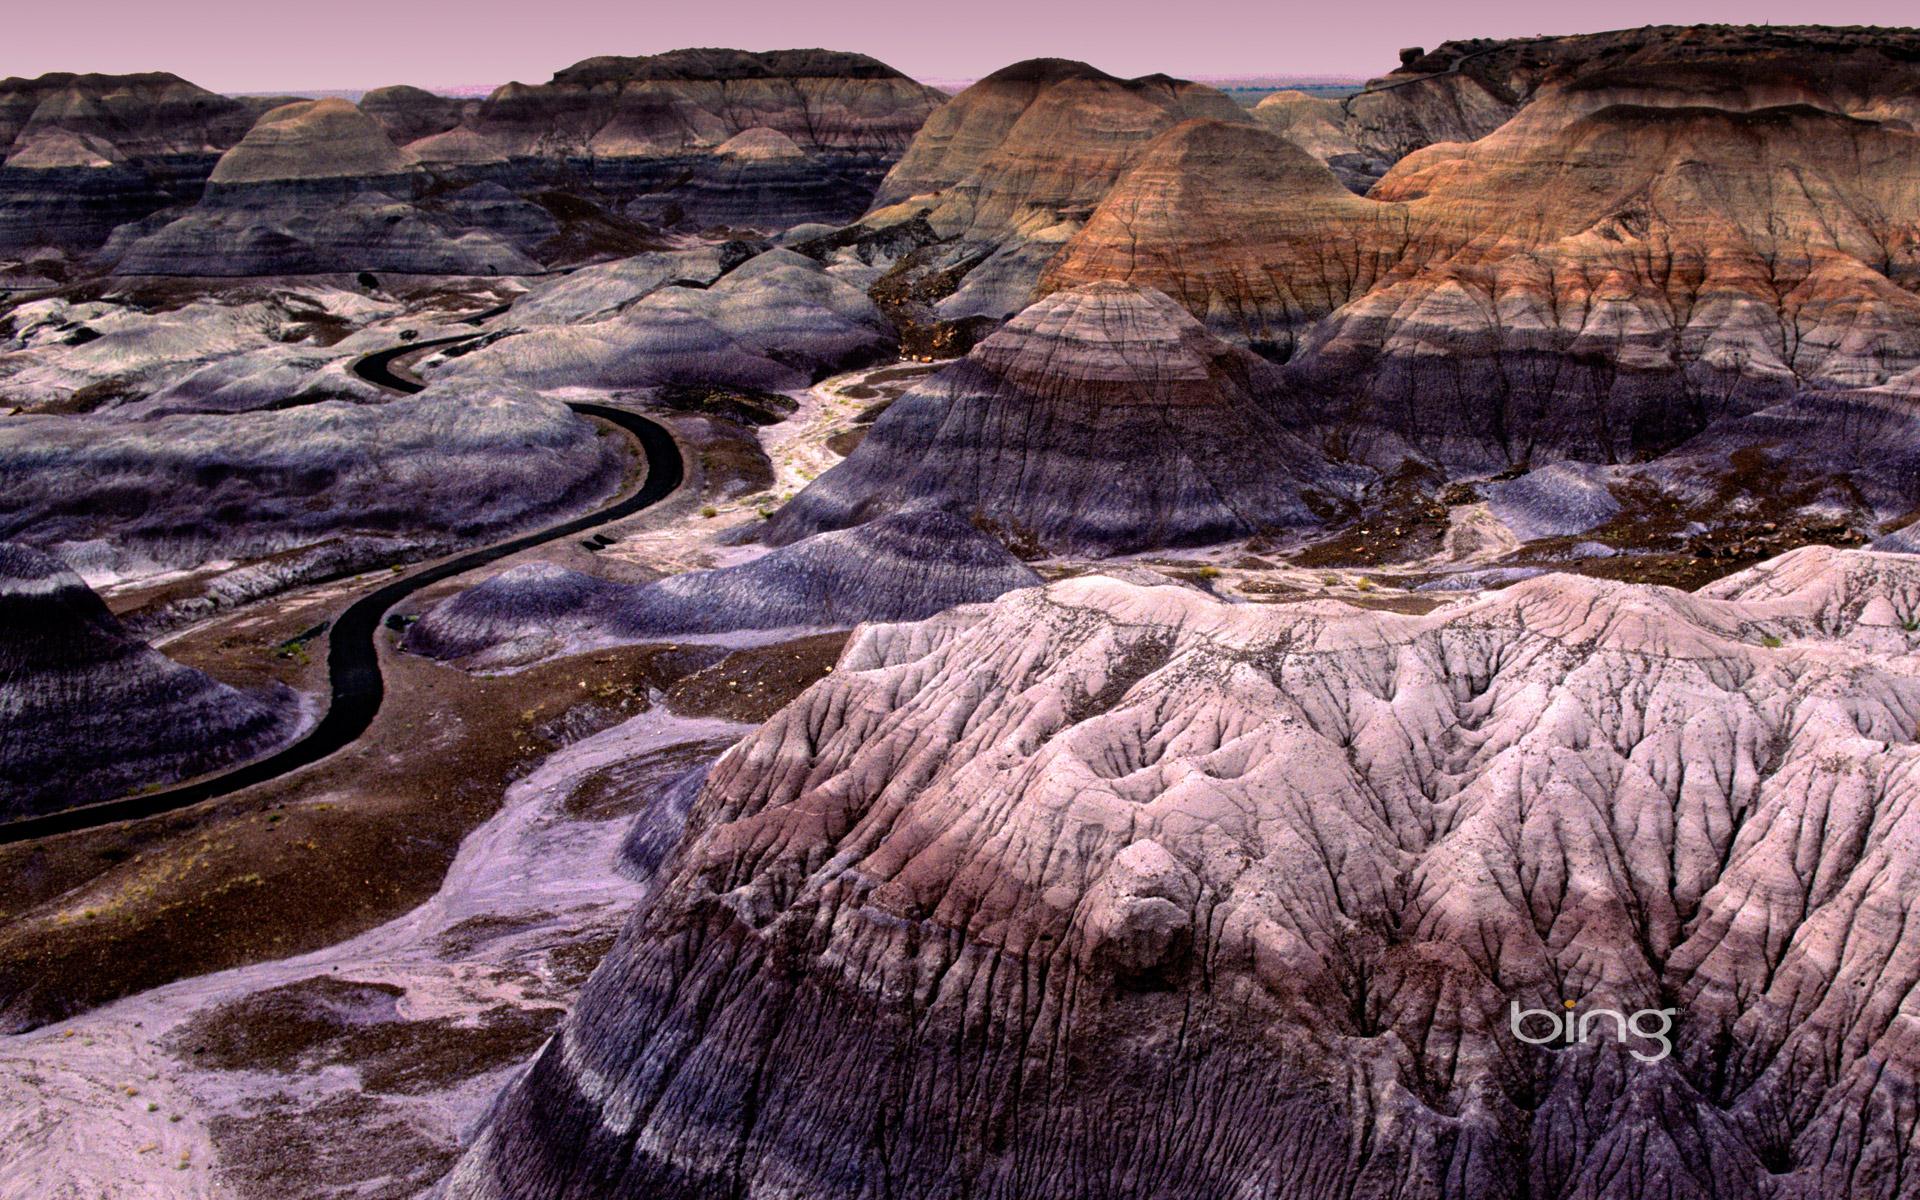 Painted Desert In The Petrified Forest National Park - Painted Desert - HD Wallpaper 